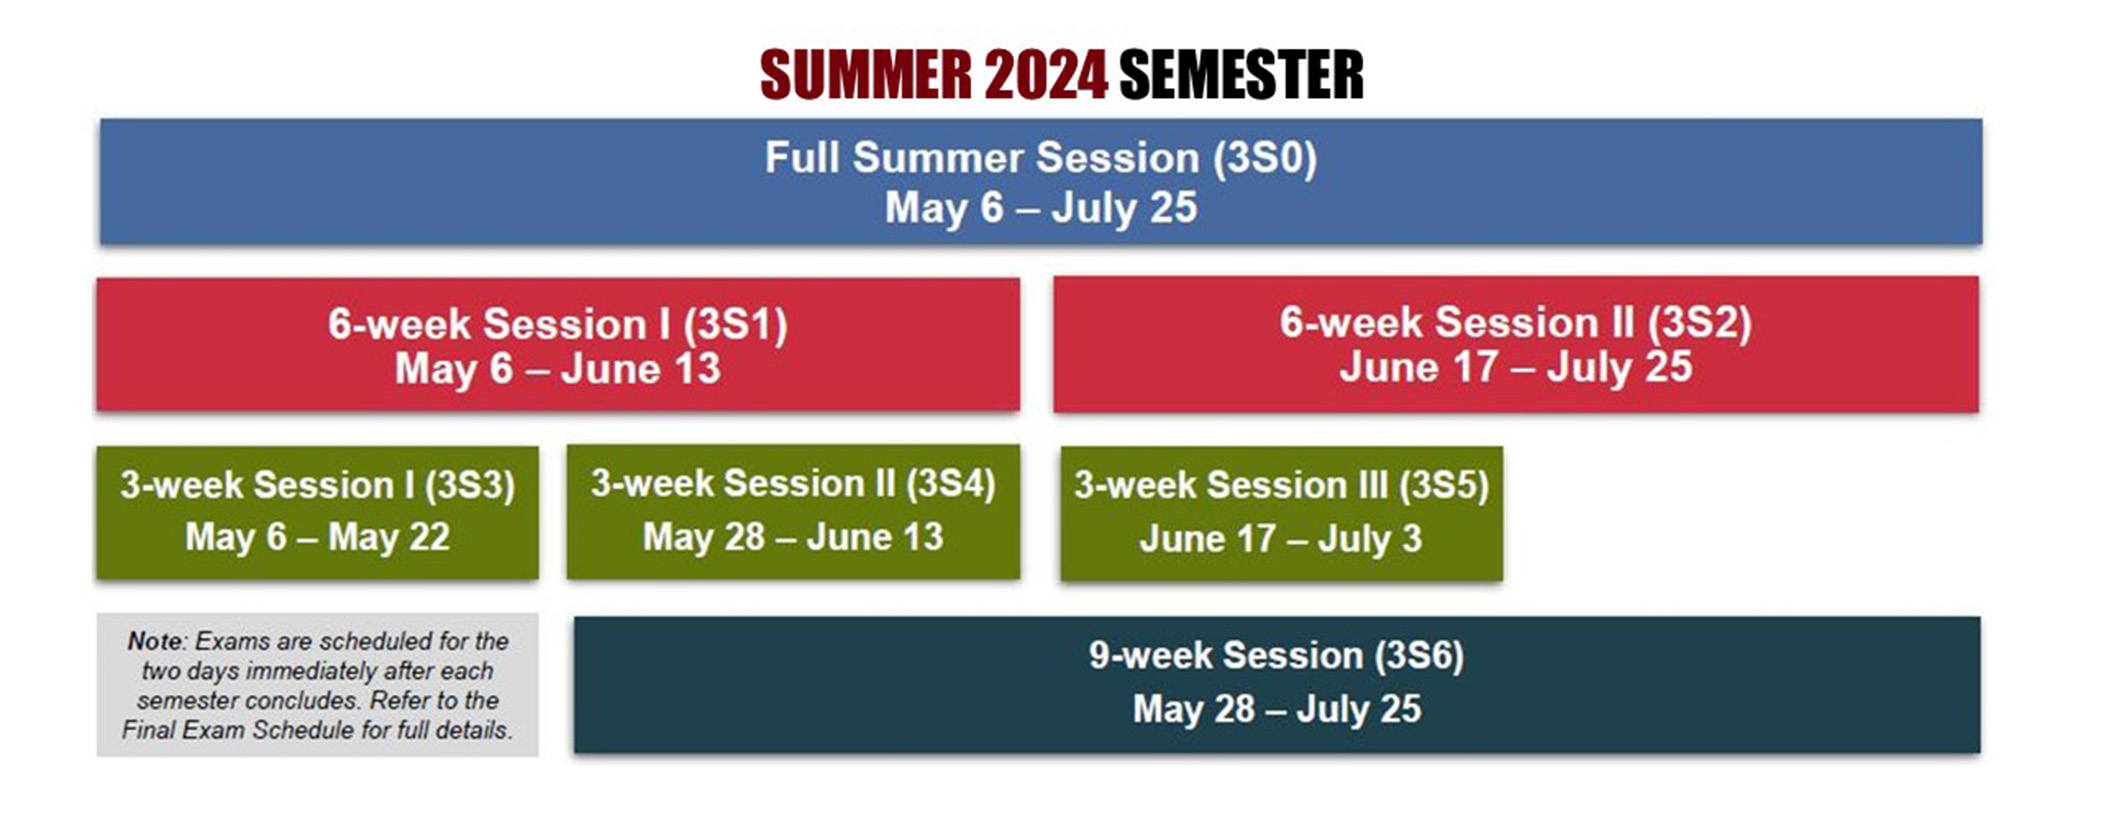 Summer 2024 Semester, Full Summer Session (3S0) May 6 - July 25, 6-week Session I (3S1) May 6 - June 13, 6-week Session II (3S2) June 17 - July 25, 3-week Session I (3S3) May 6 - May 22, 3-week Session II (3S4) May 28 - June 13, 3-week Session III (3S5) June 17 - July 3, 9-week Session (3S6) May 28 - July 25, Note: Exams are scheduled for the two days immediately after each semester concludes. Refer to the Final Exam Schedule for full details.